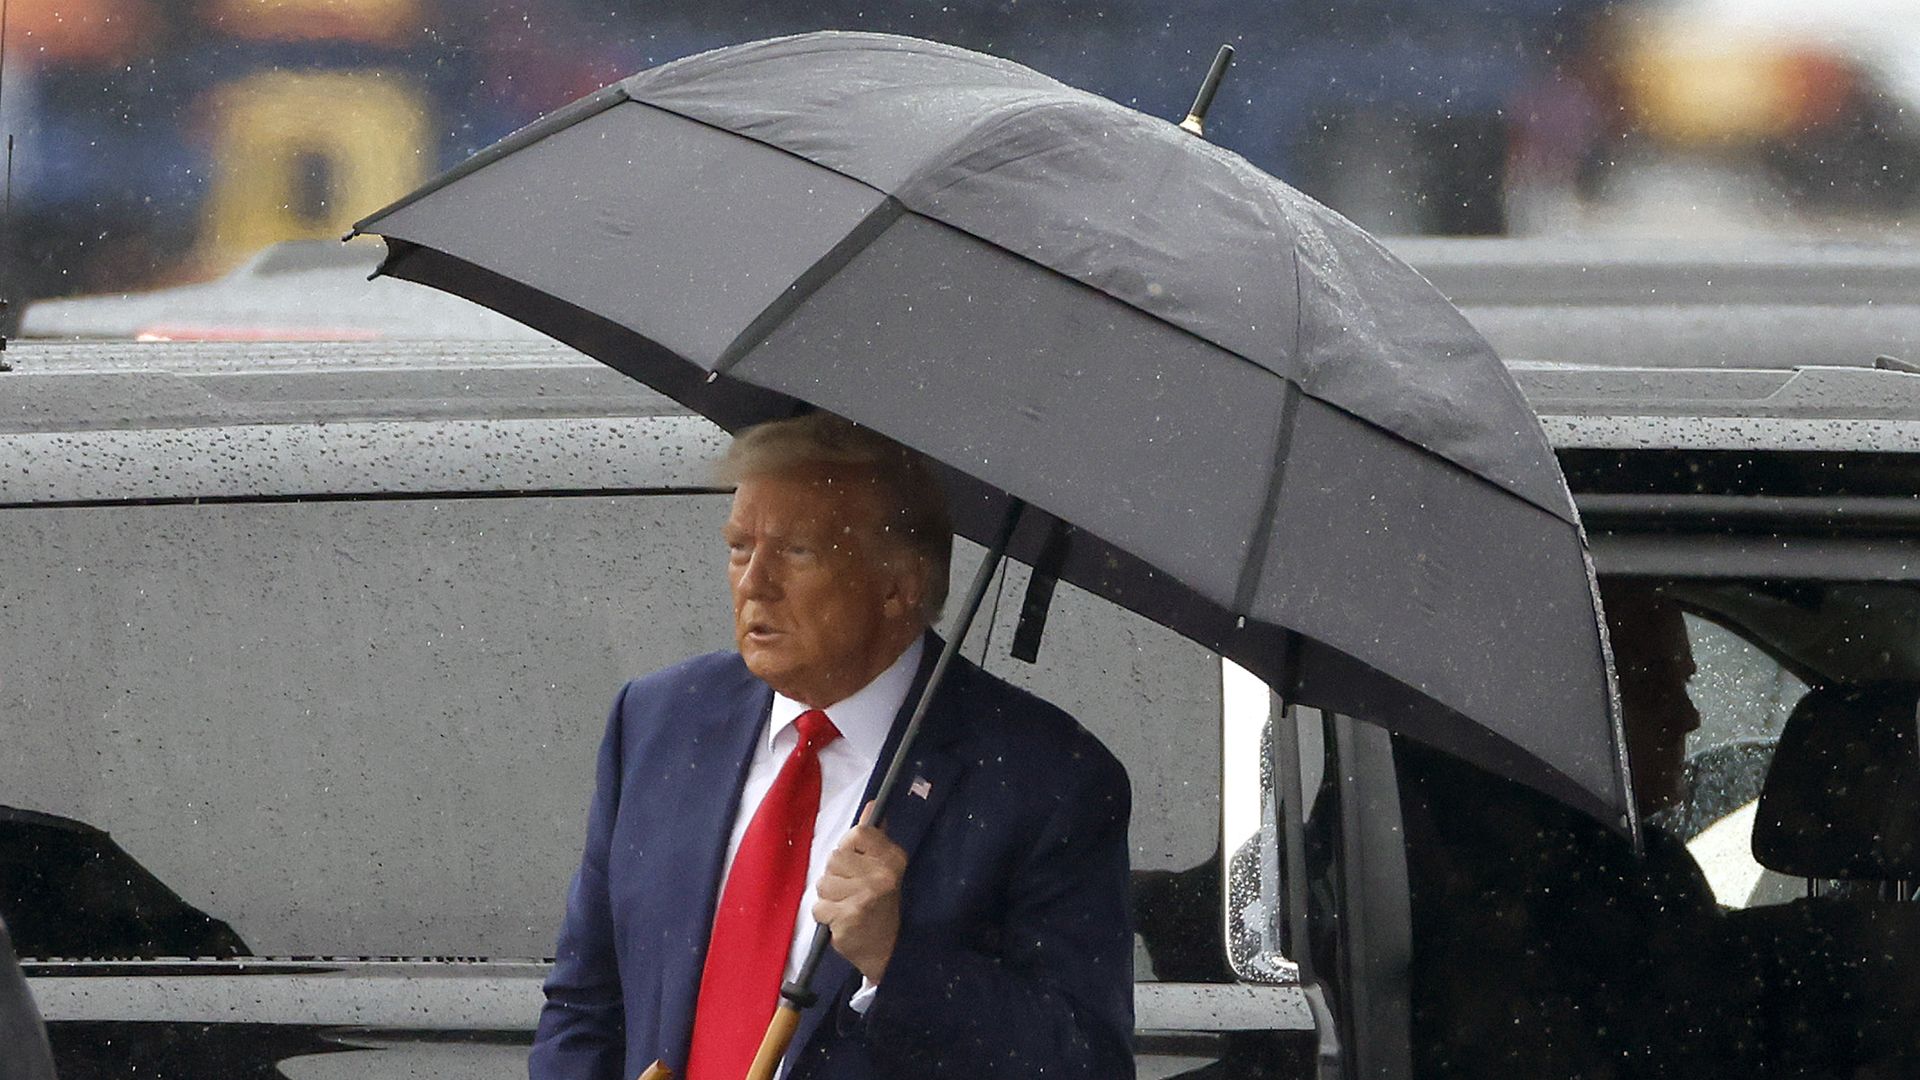 Former U.S. President Donald Trump holds an umbrella as he arrives at Reagan National Airport following an arraignment in a Washington, D.C. court on August 3, 2023 in Arlington, Virginia. 